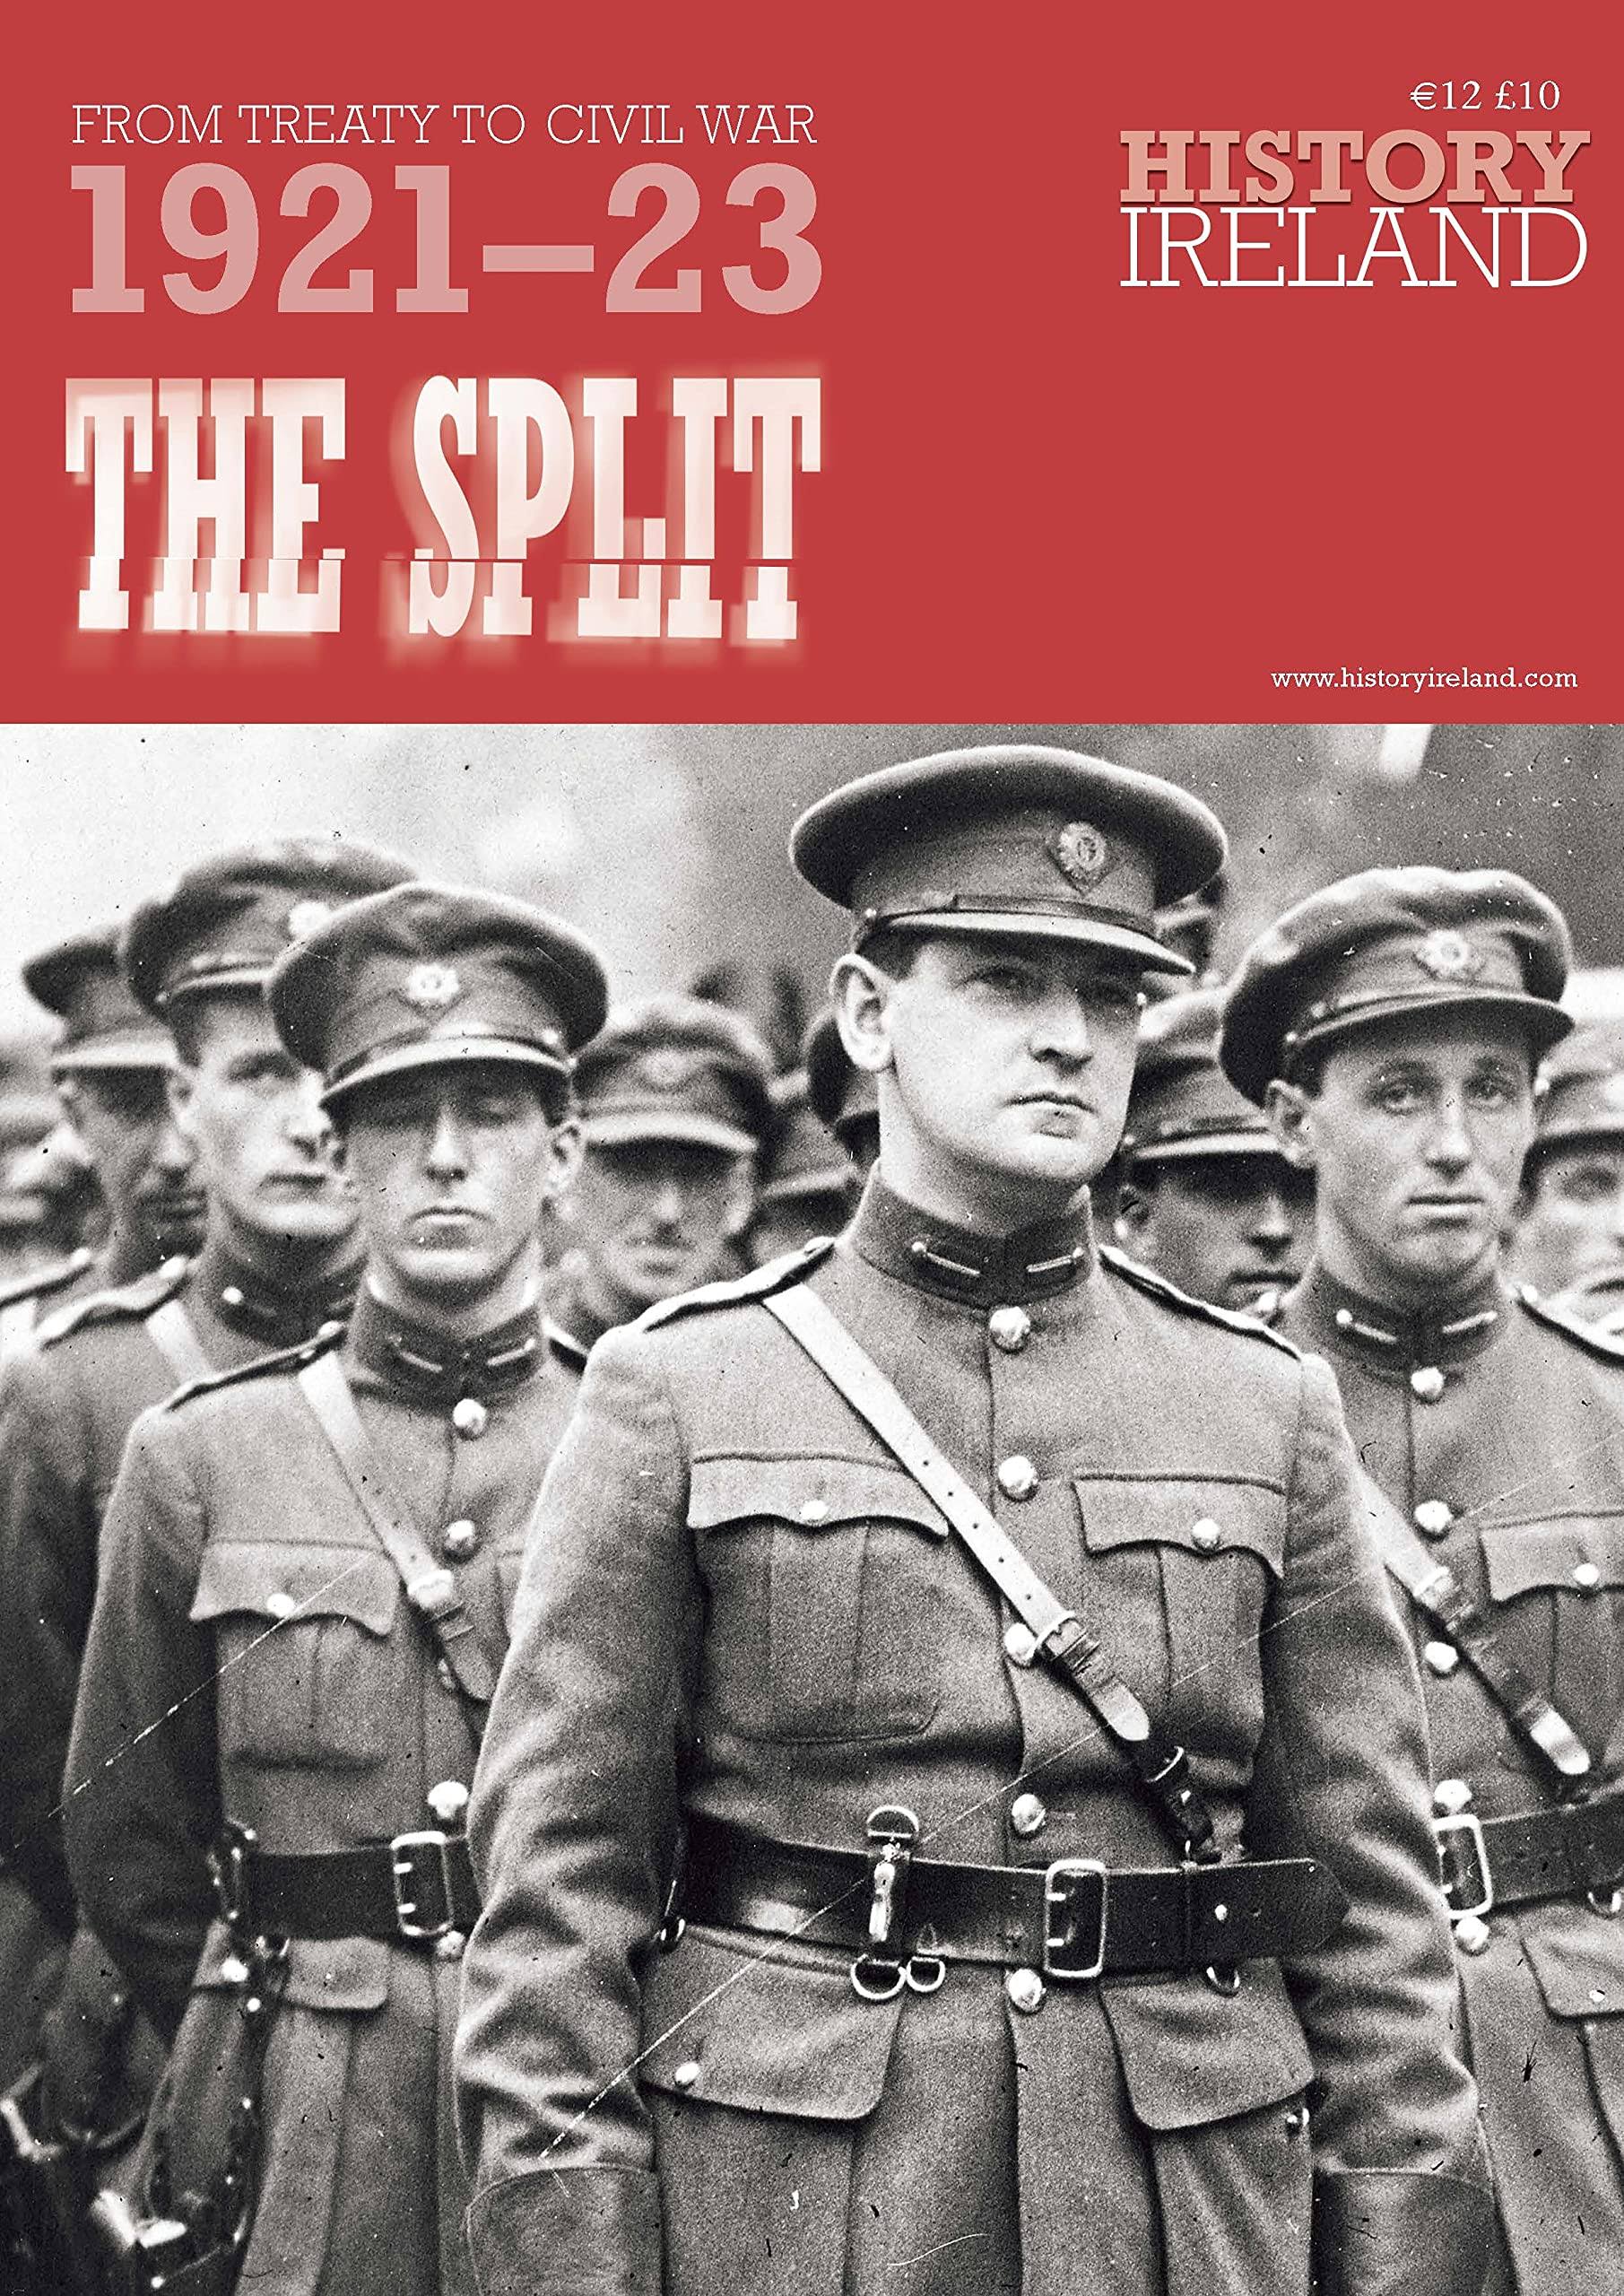 The Split: From Treaty to Civil War, 1921-23 [Book]